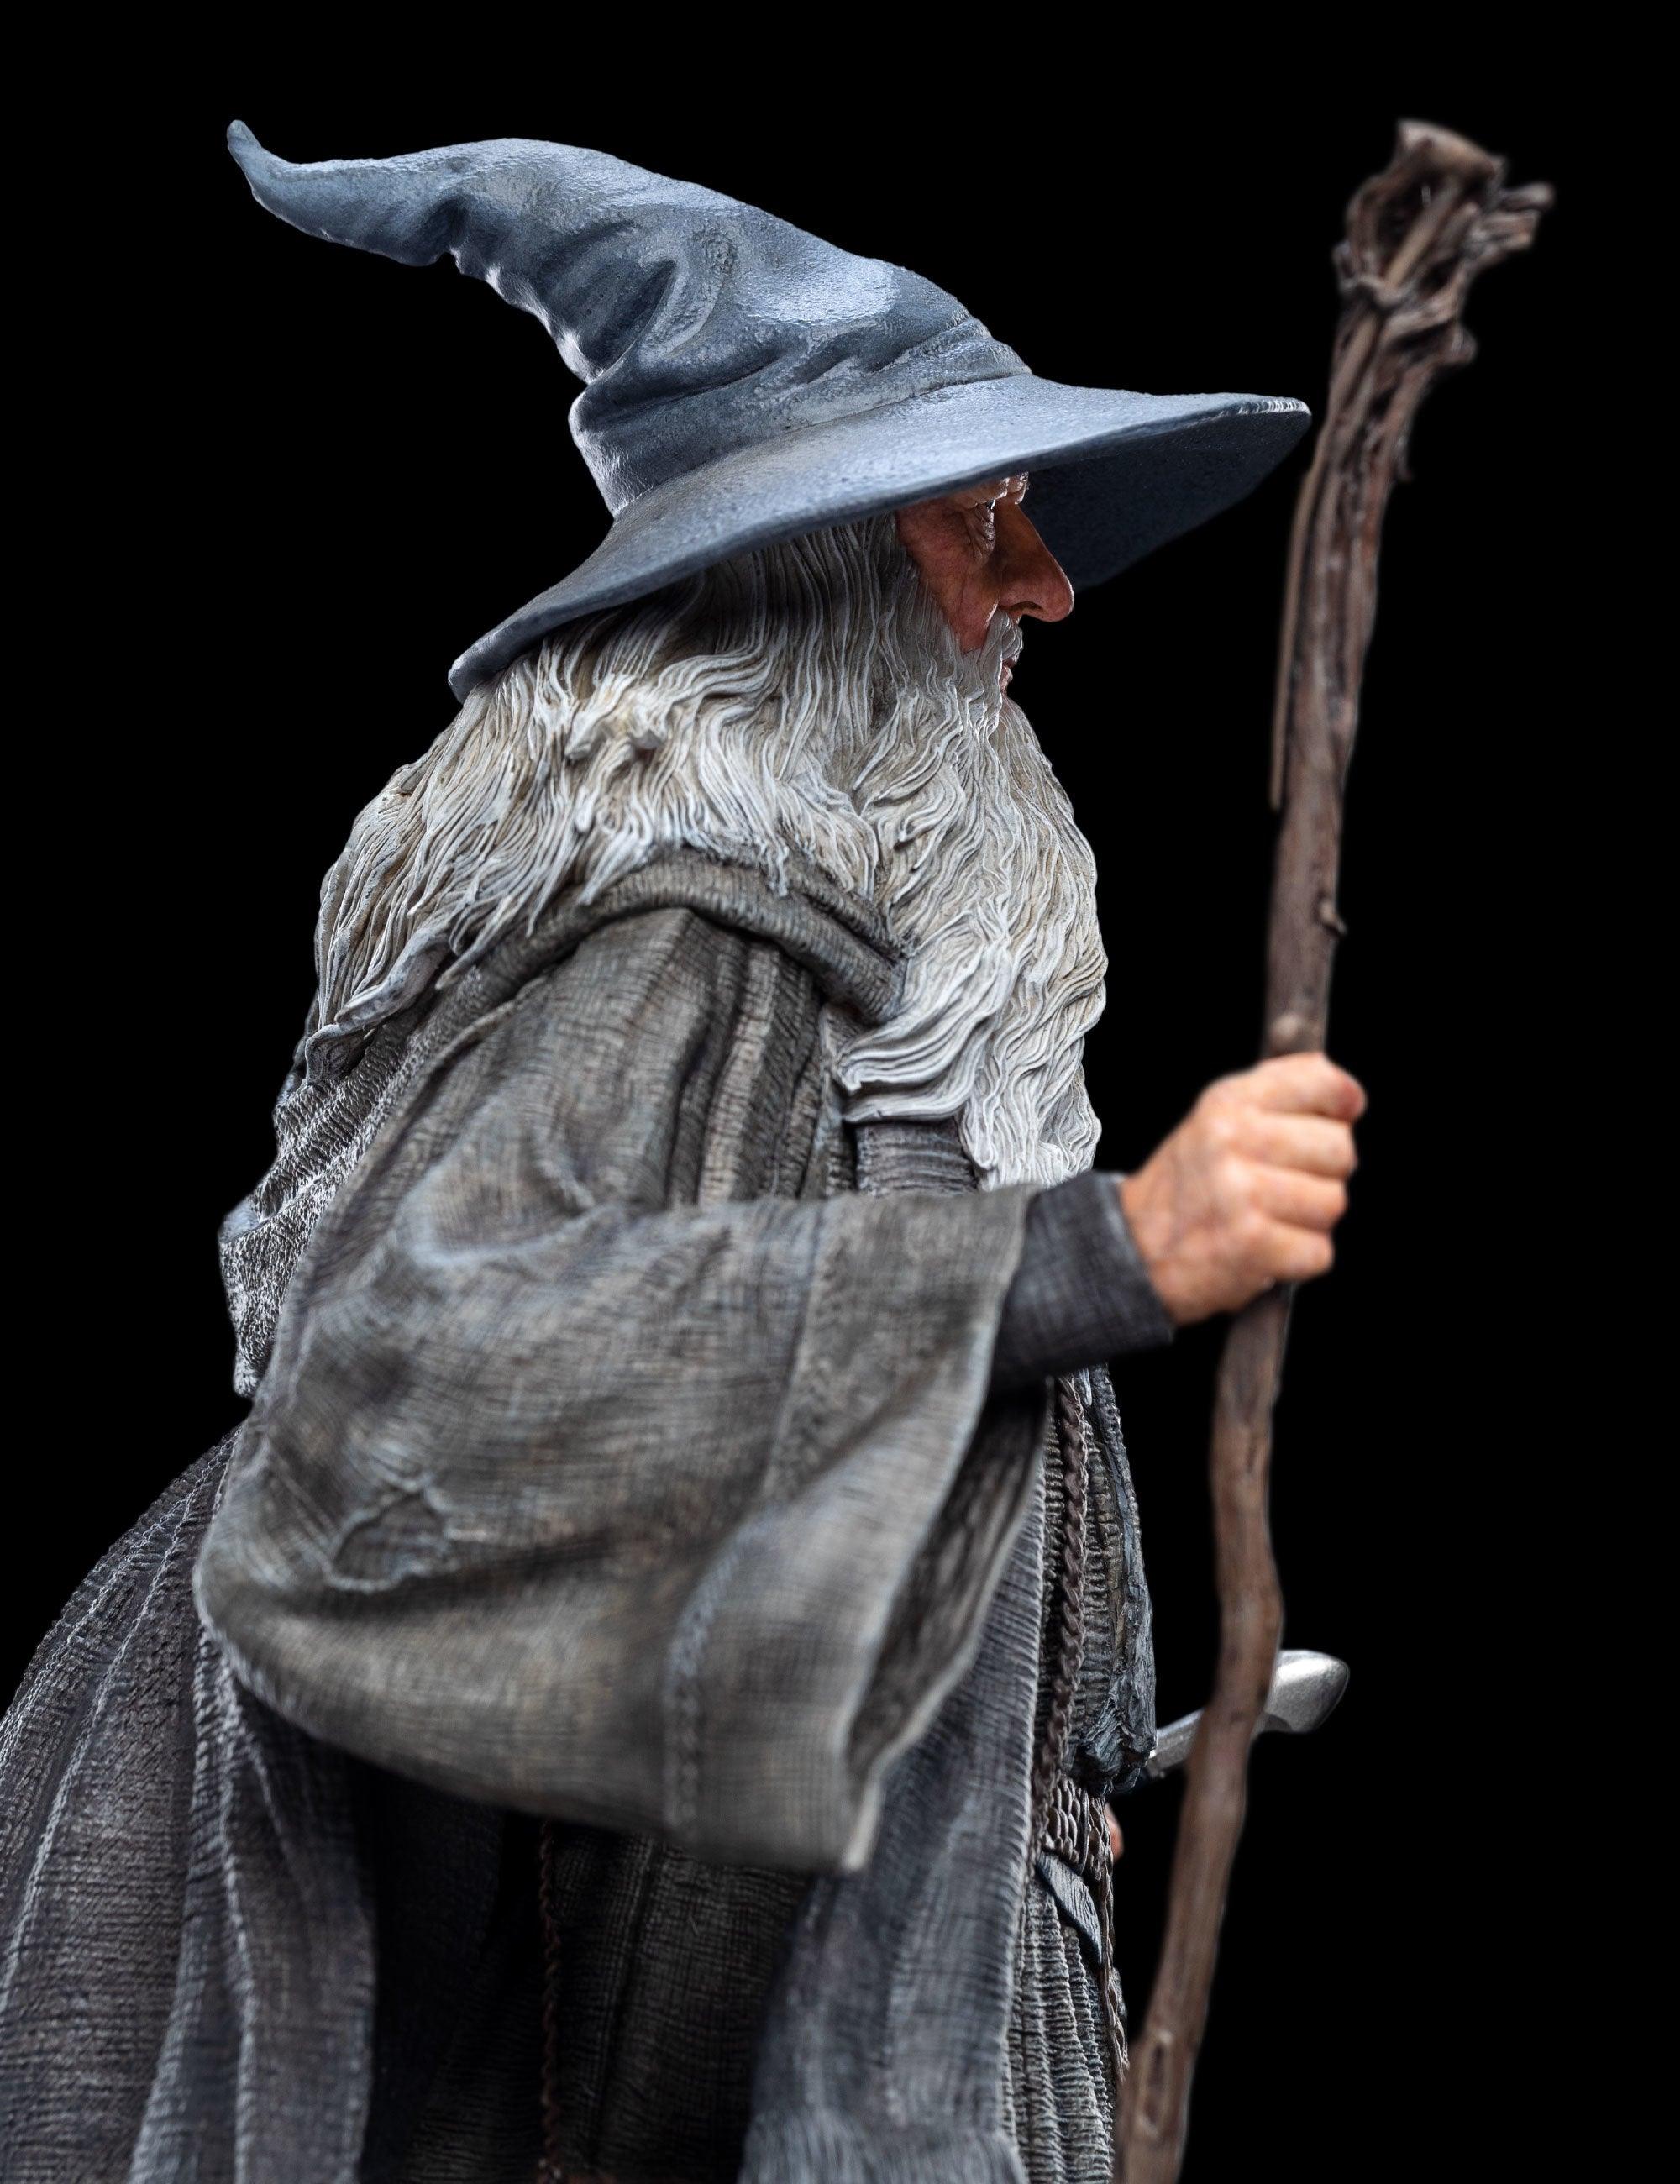 WET02981 The Lord of the Rings - Gandalf the Grey, Pilgrim 1:6 Scale Statue - Weta Workshop - Titan Pop Culture